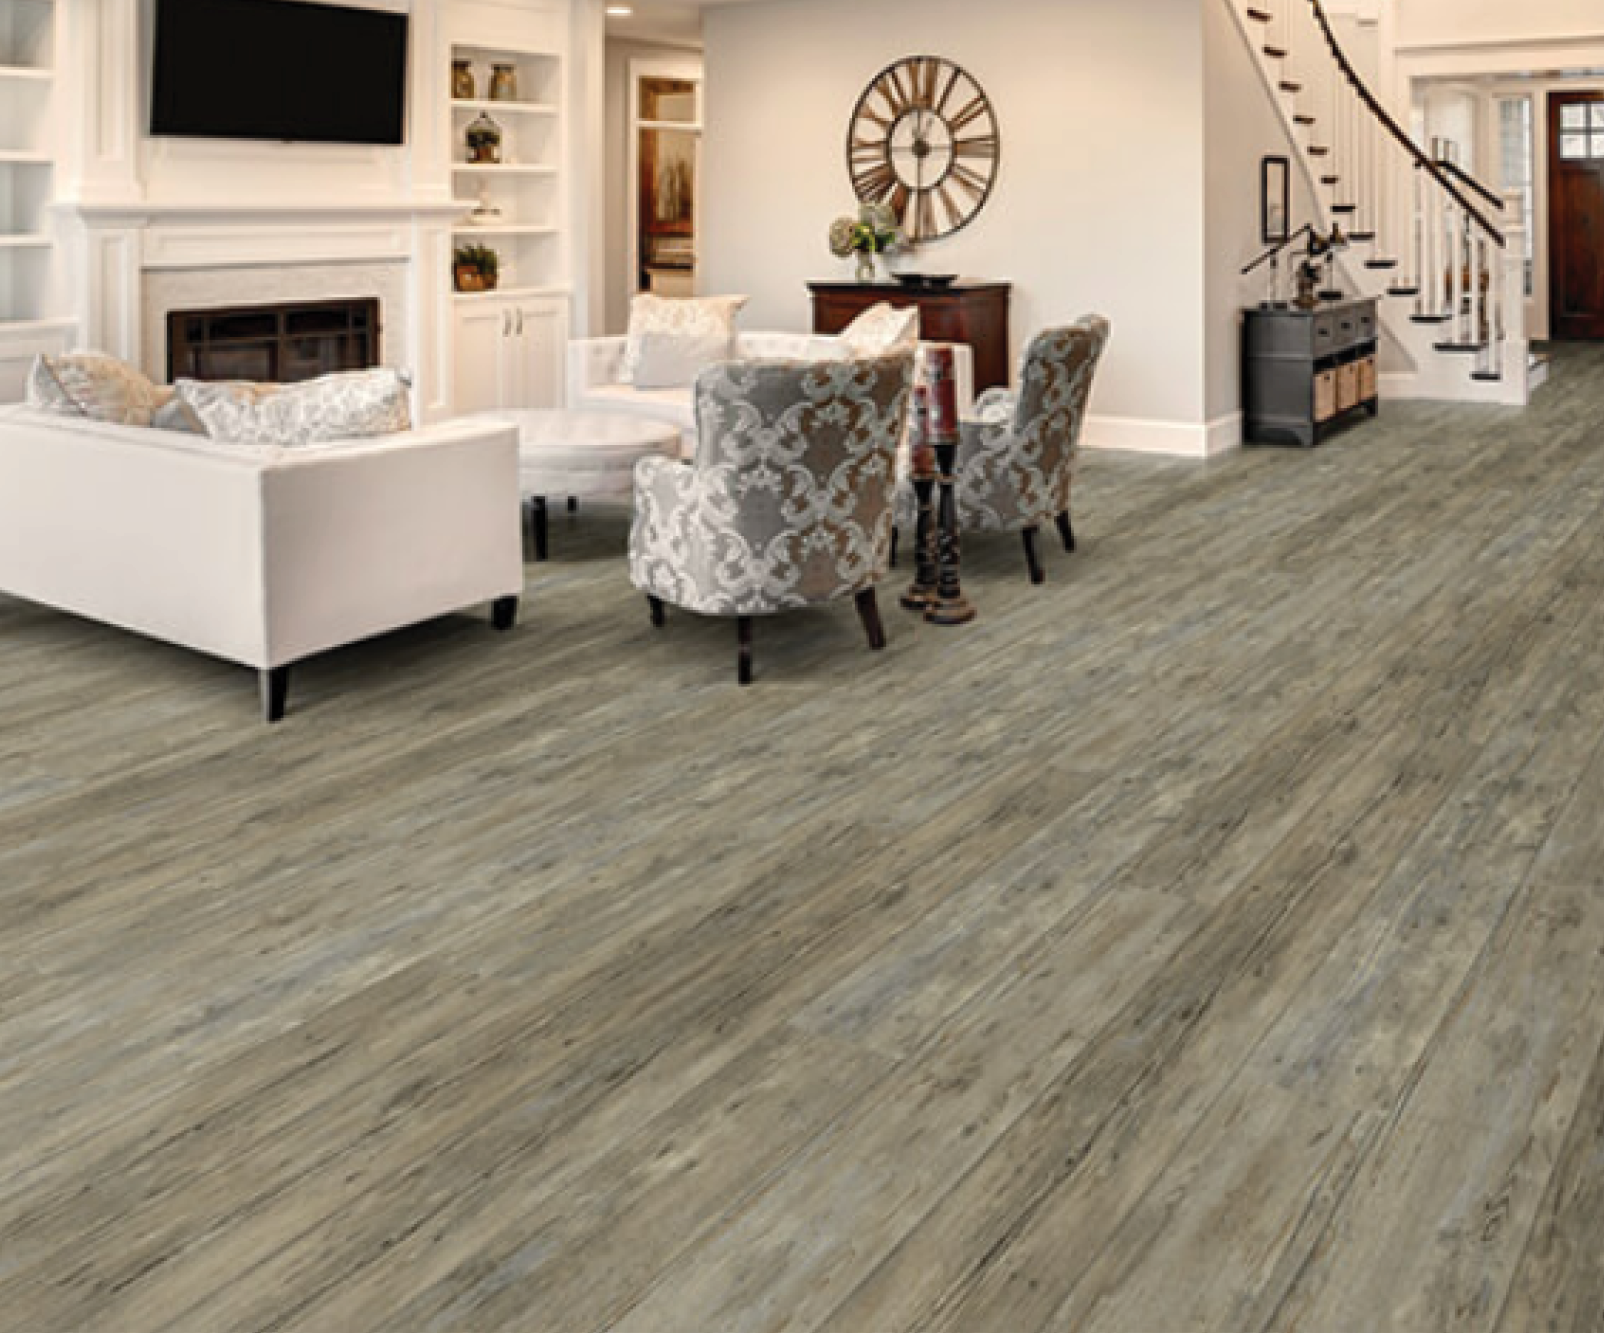 Three Easy Steps to Find the Perfect Flooring